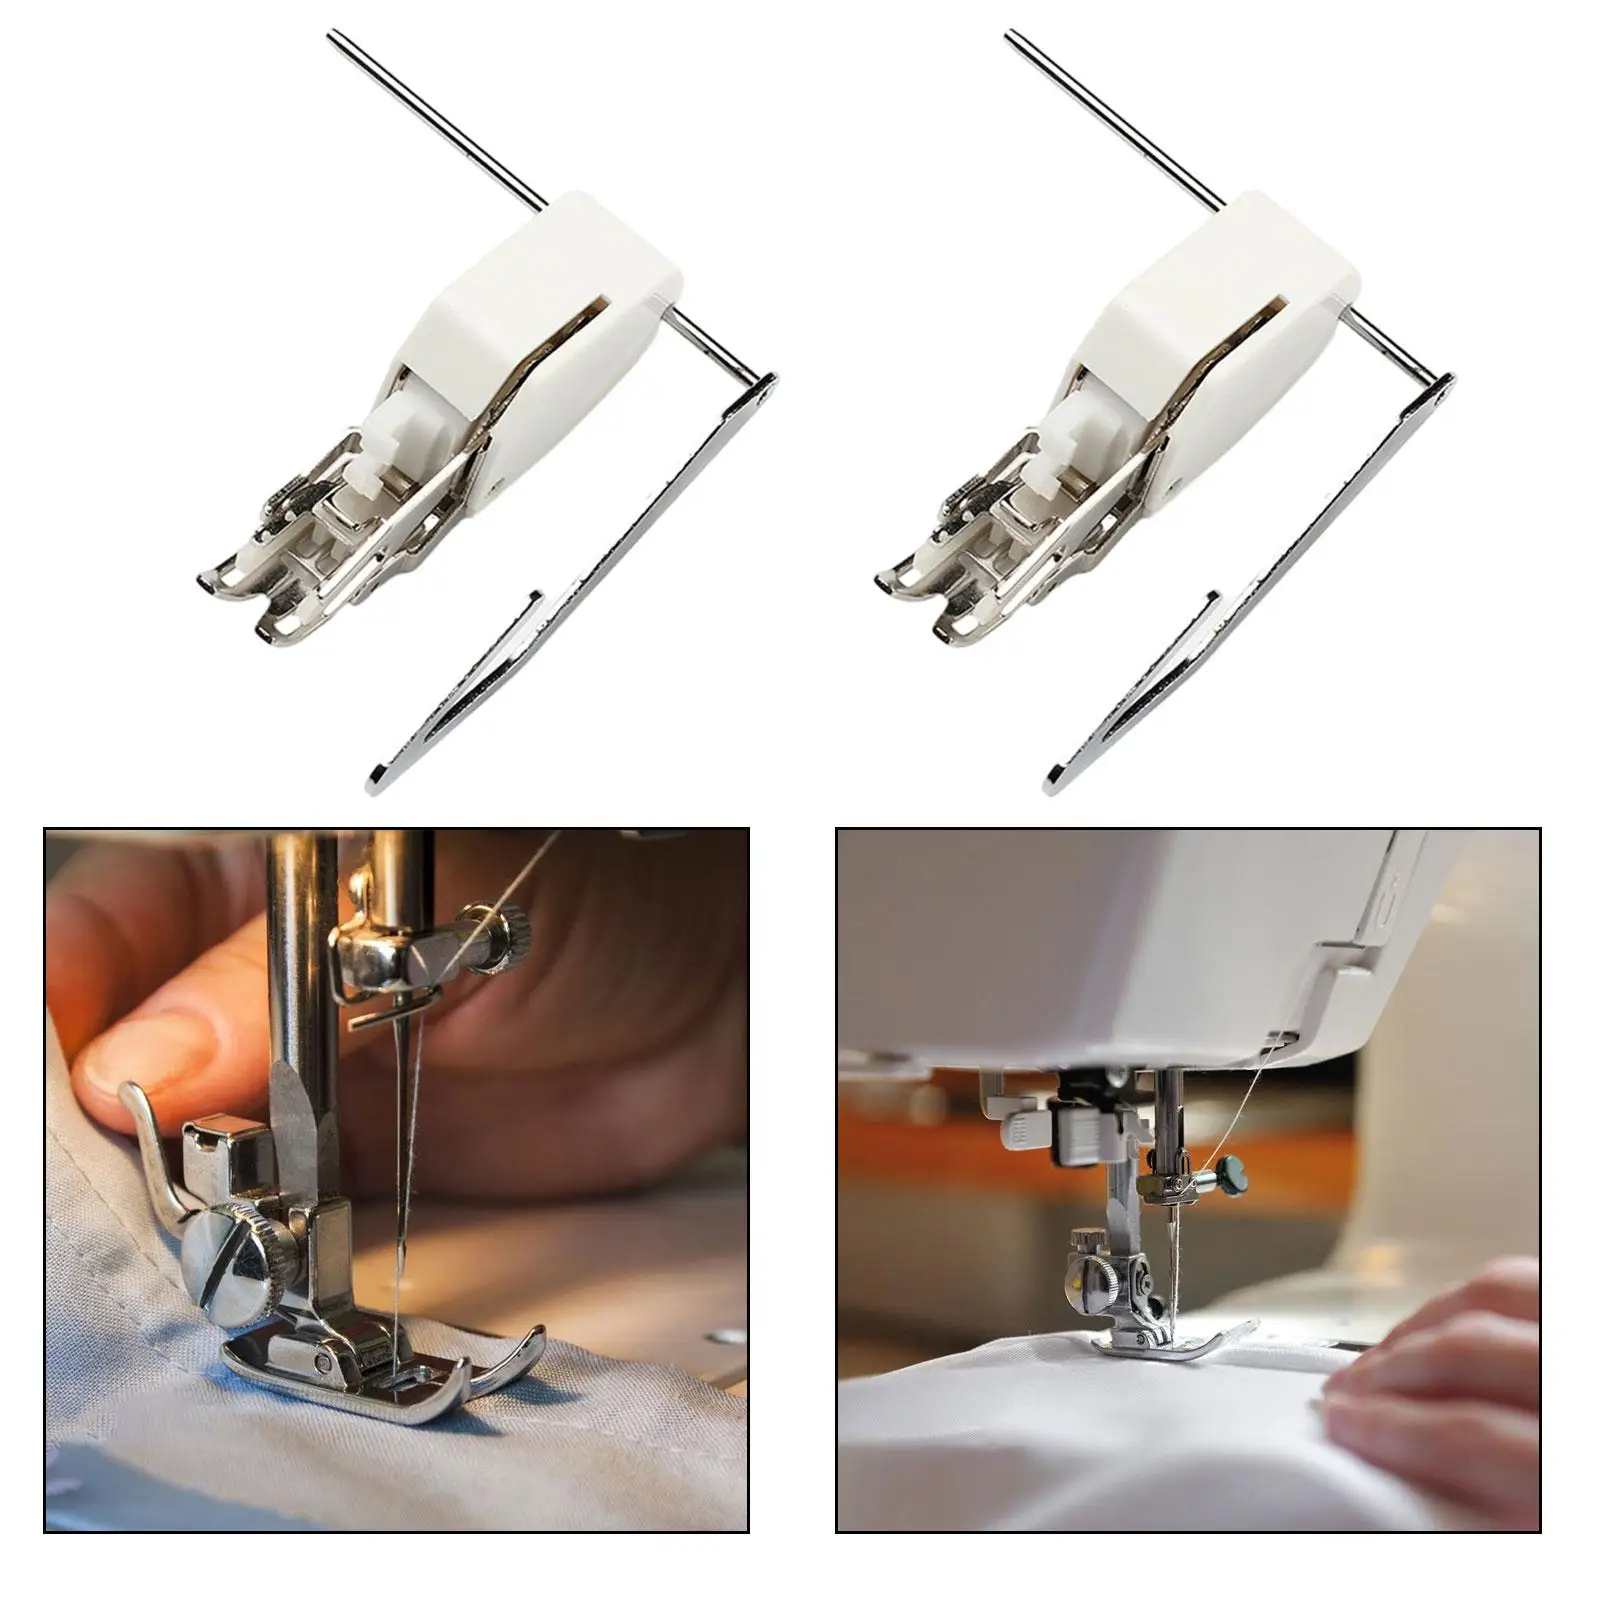 Open Toe Walking Foot Arts Crafts DIY Quilting Lightweight Presser Foot for Thick Fabric Home Stripes Plaids Stitching Beginners